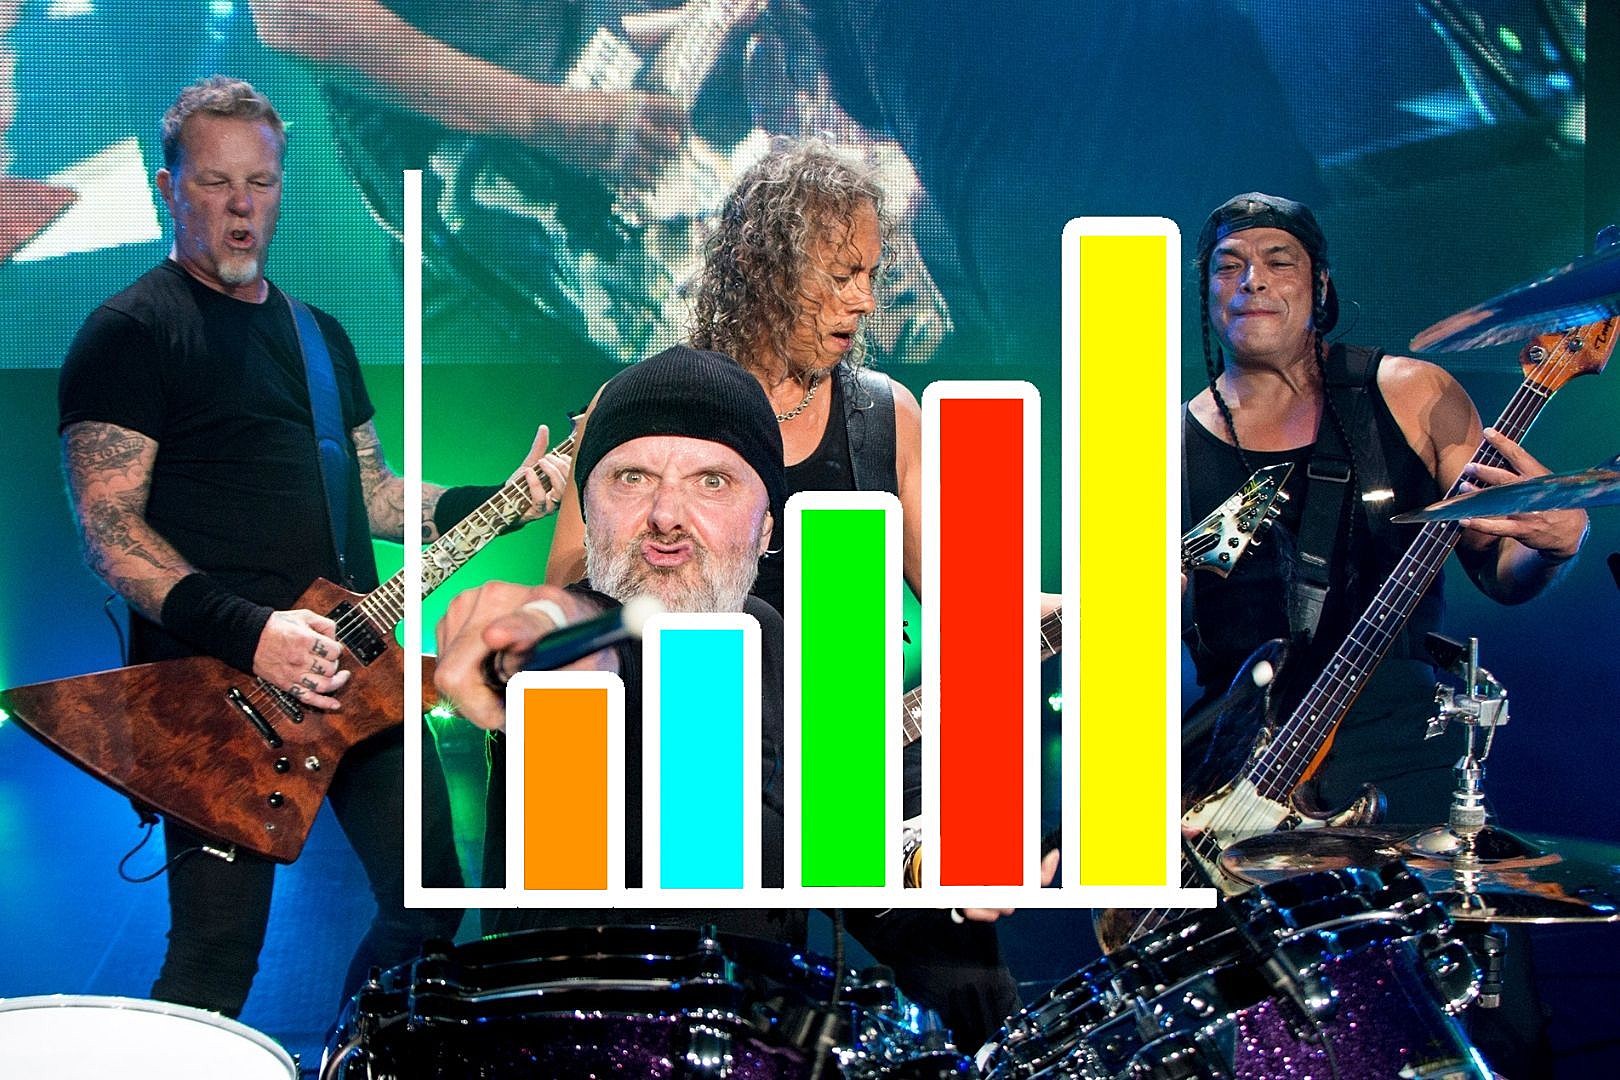 Metallica Have Battled Only 2 Others for Most Searched Metal Band